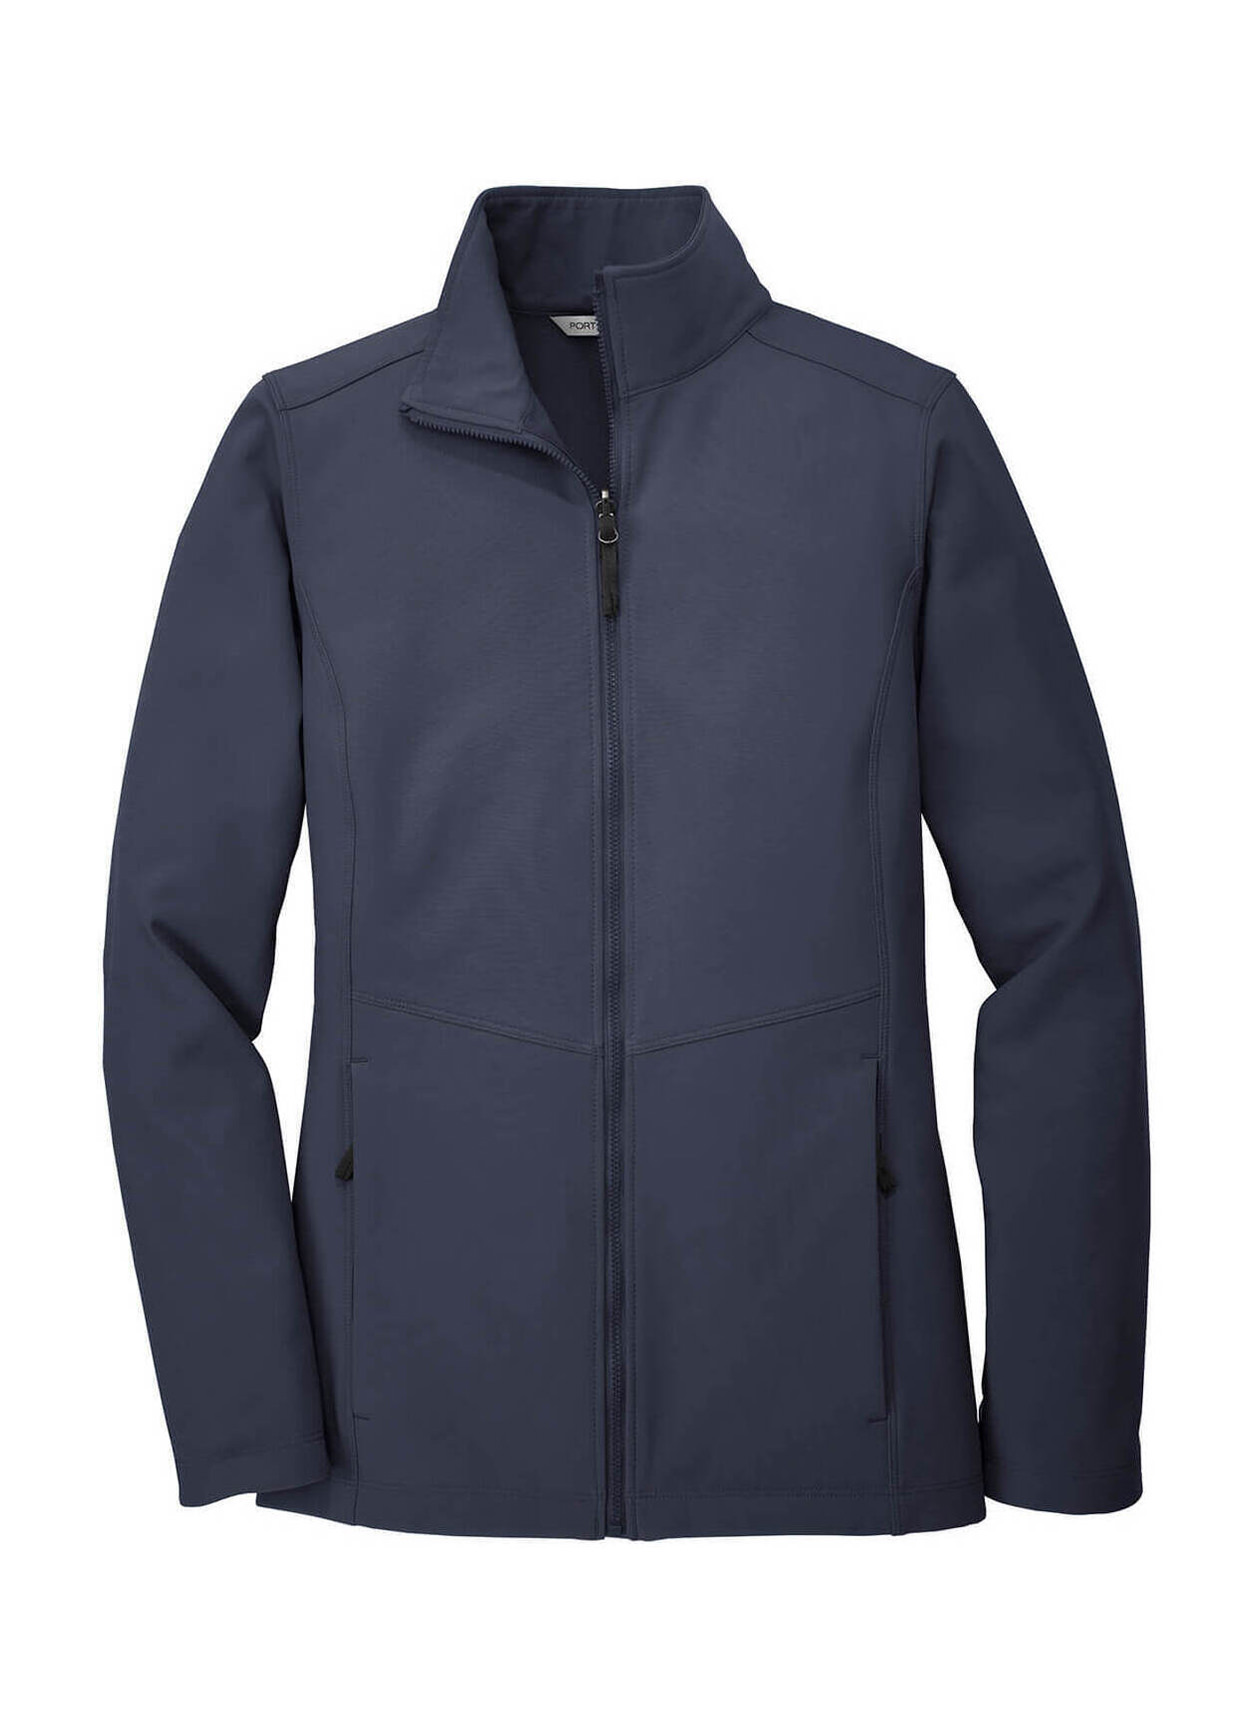 Port Authority Women's River Blue Navy Collective Soft Shell Jacket